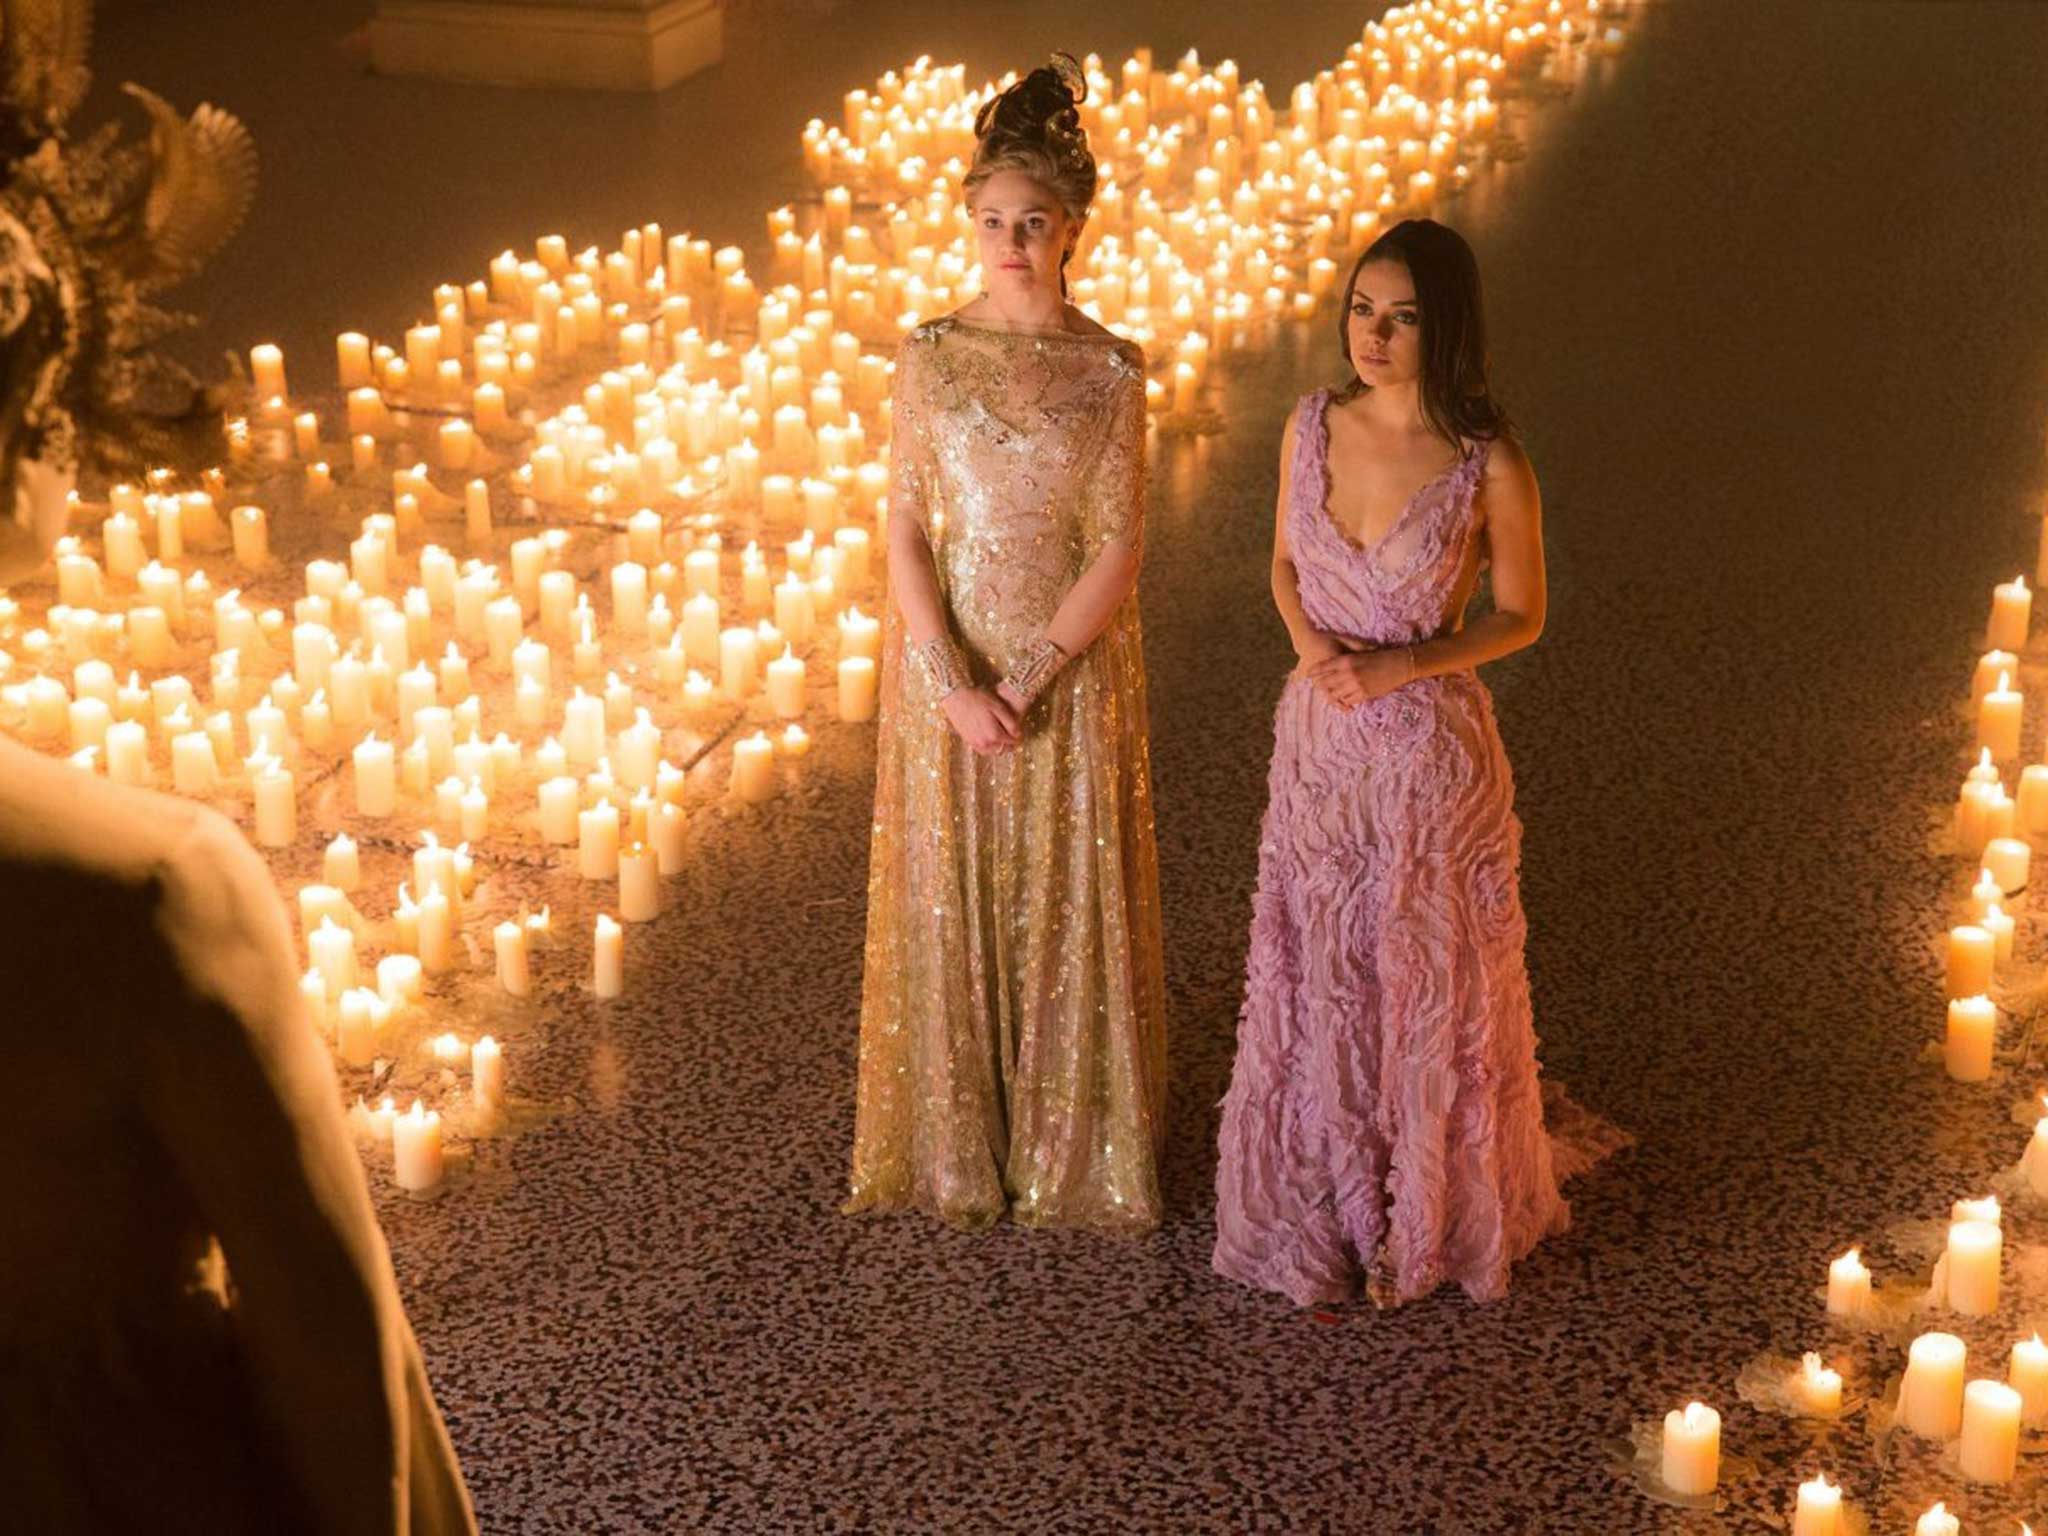 Tuppence Middleton and Mila Kunis in the Wachowskis’ glossy but hammy ‘Jupiter Ascending’